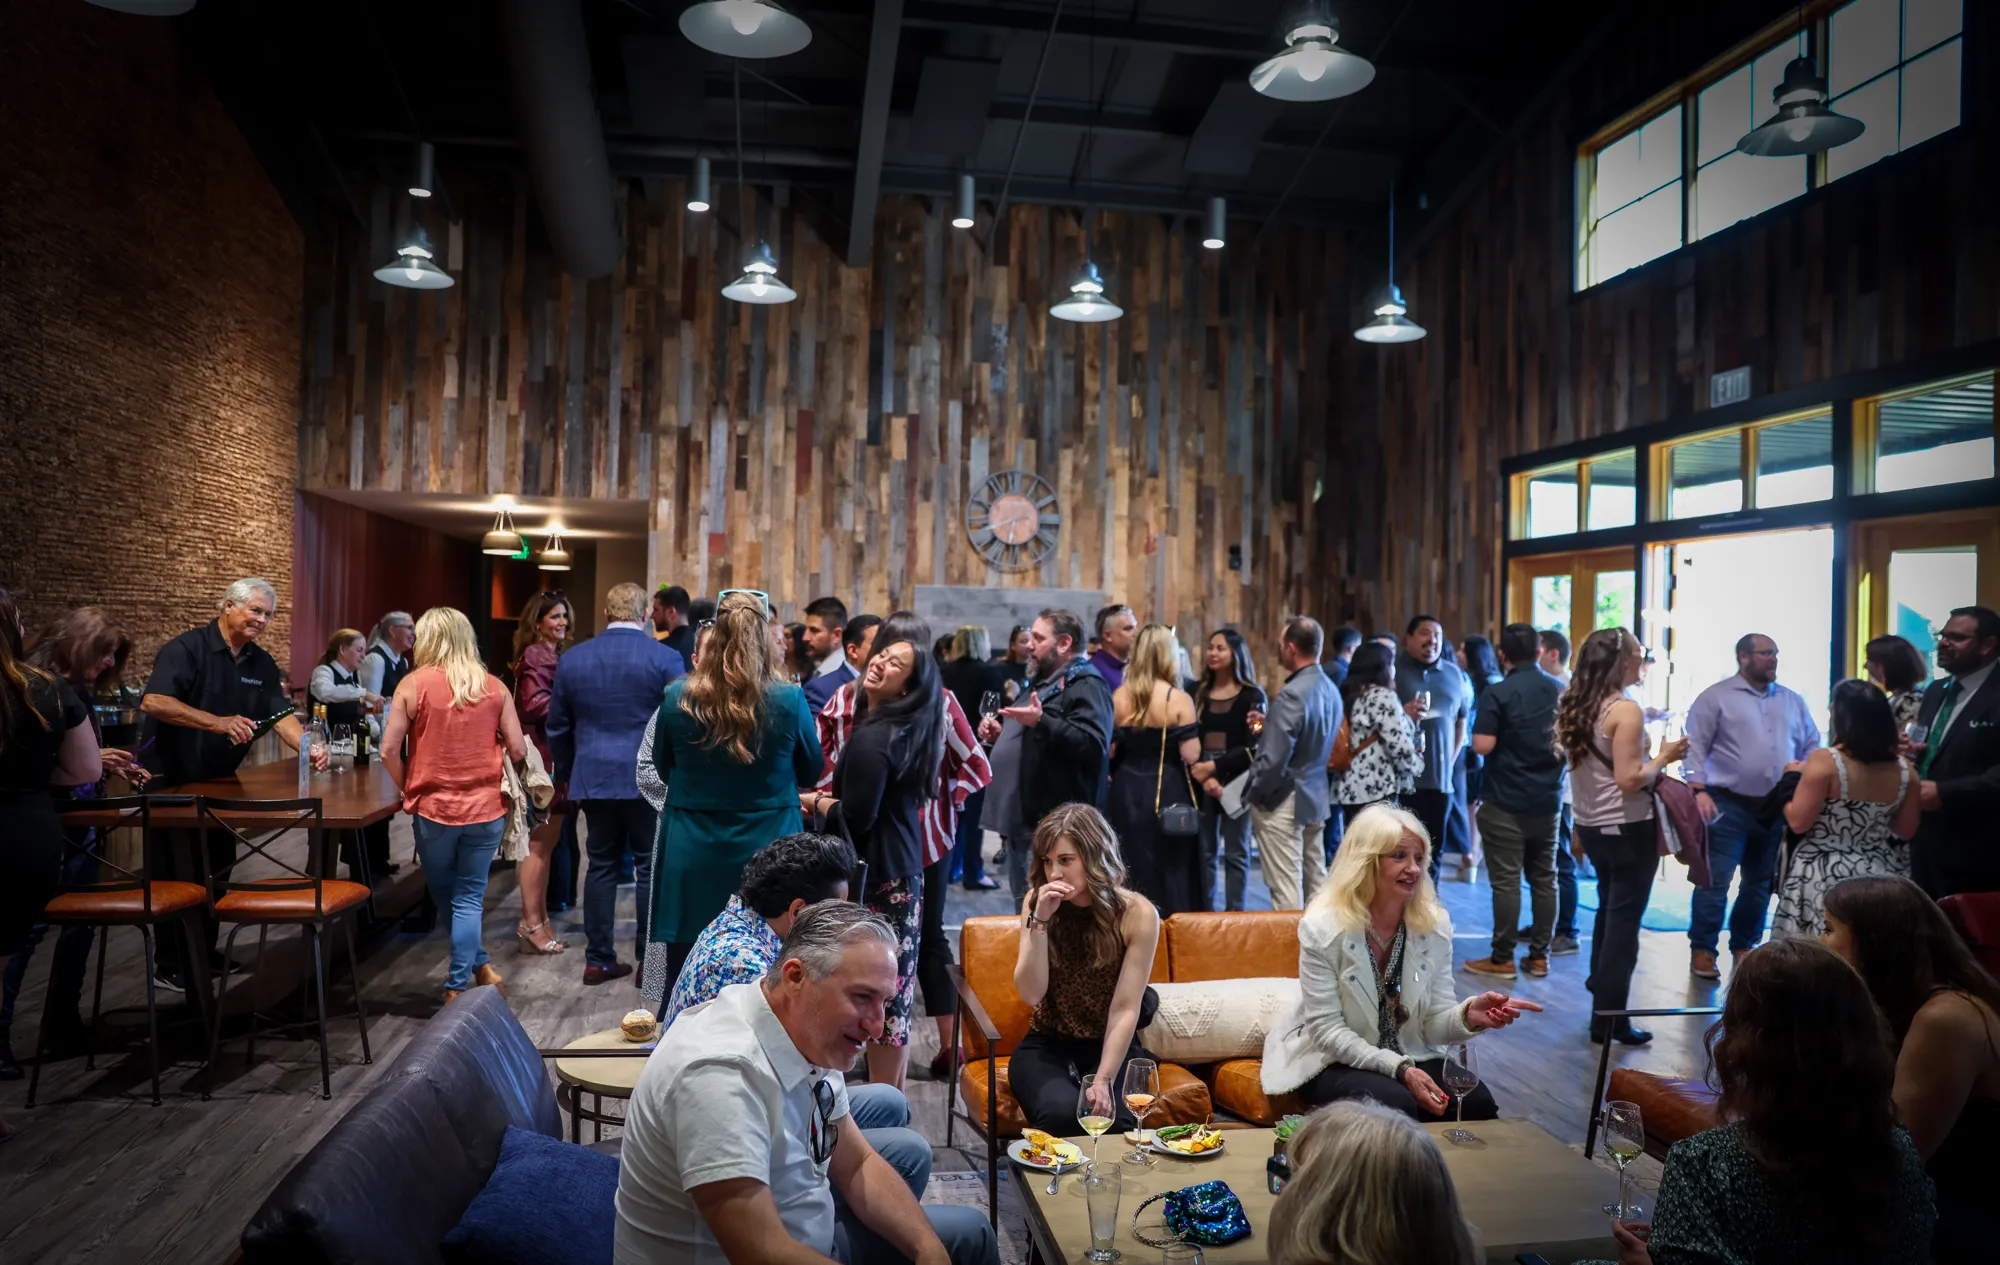 Guests gathered inside the Sugarloaf Wine Co. tasting room and lounge for a private event, indoor event venue, winery events, Santa Rosa, CA